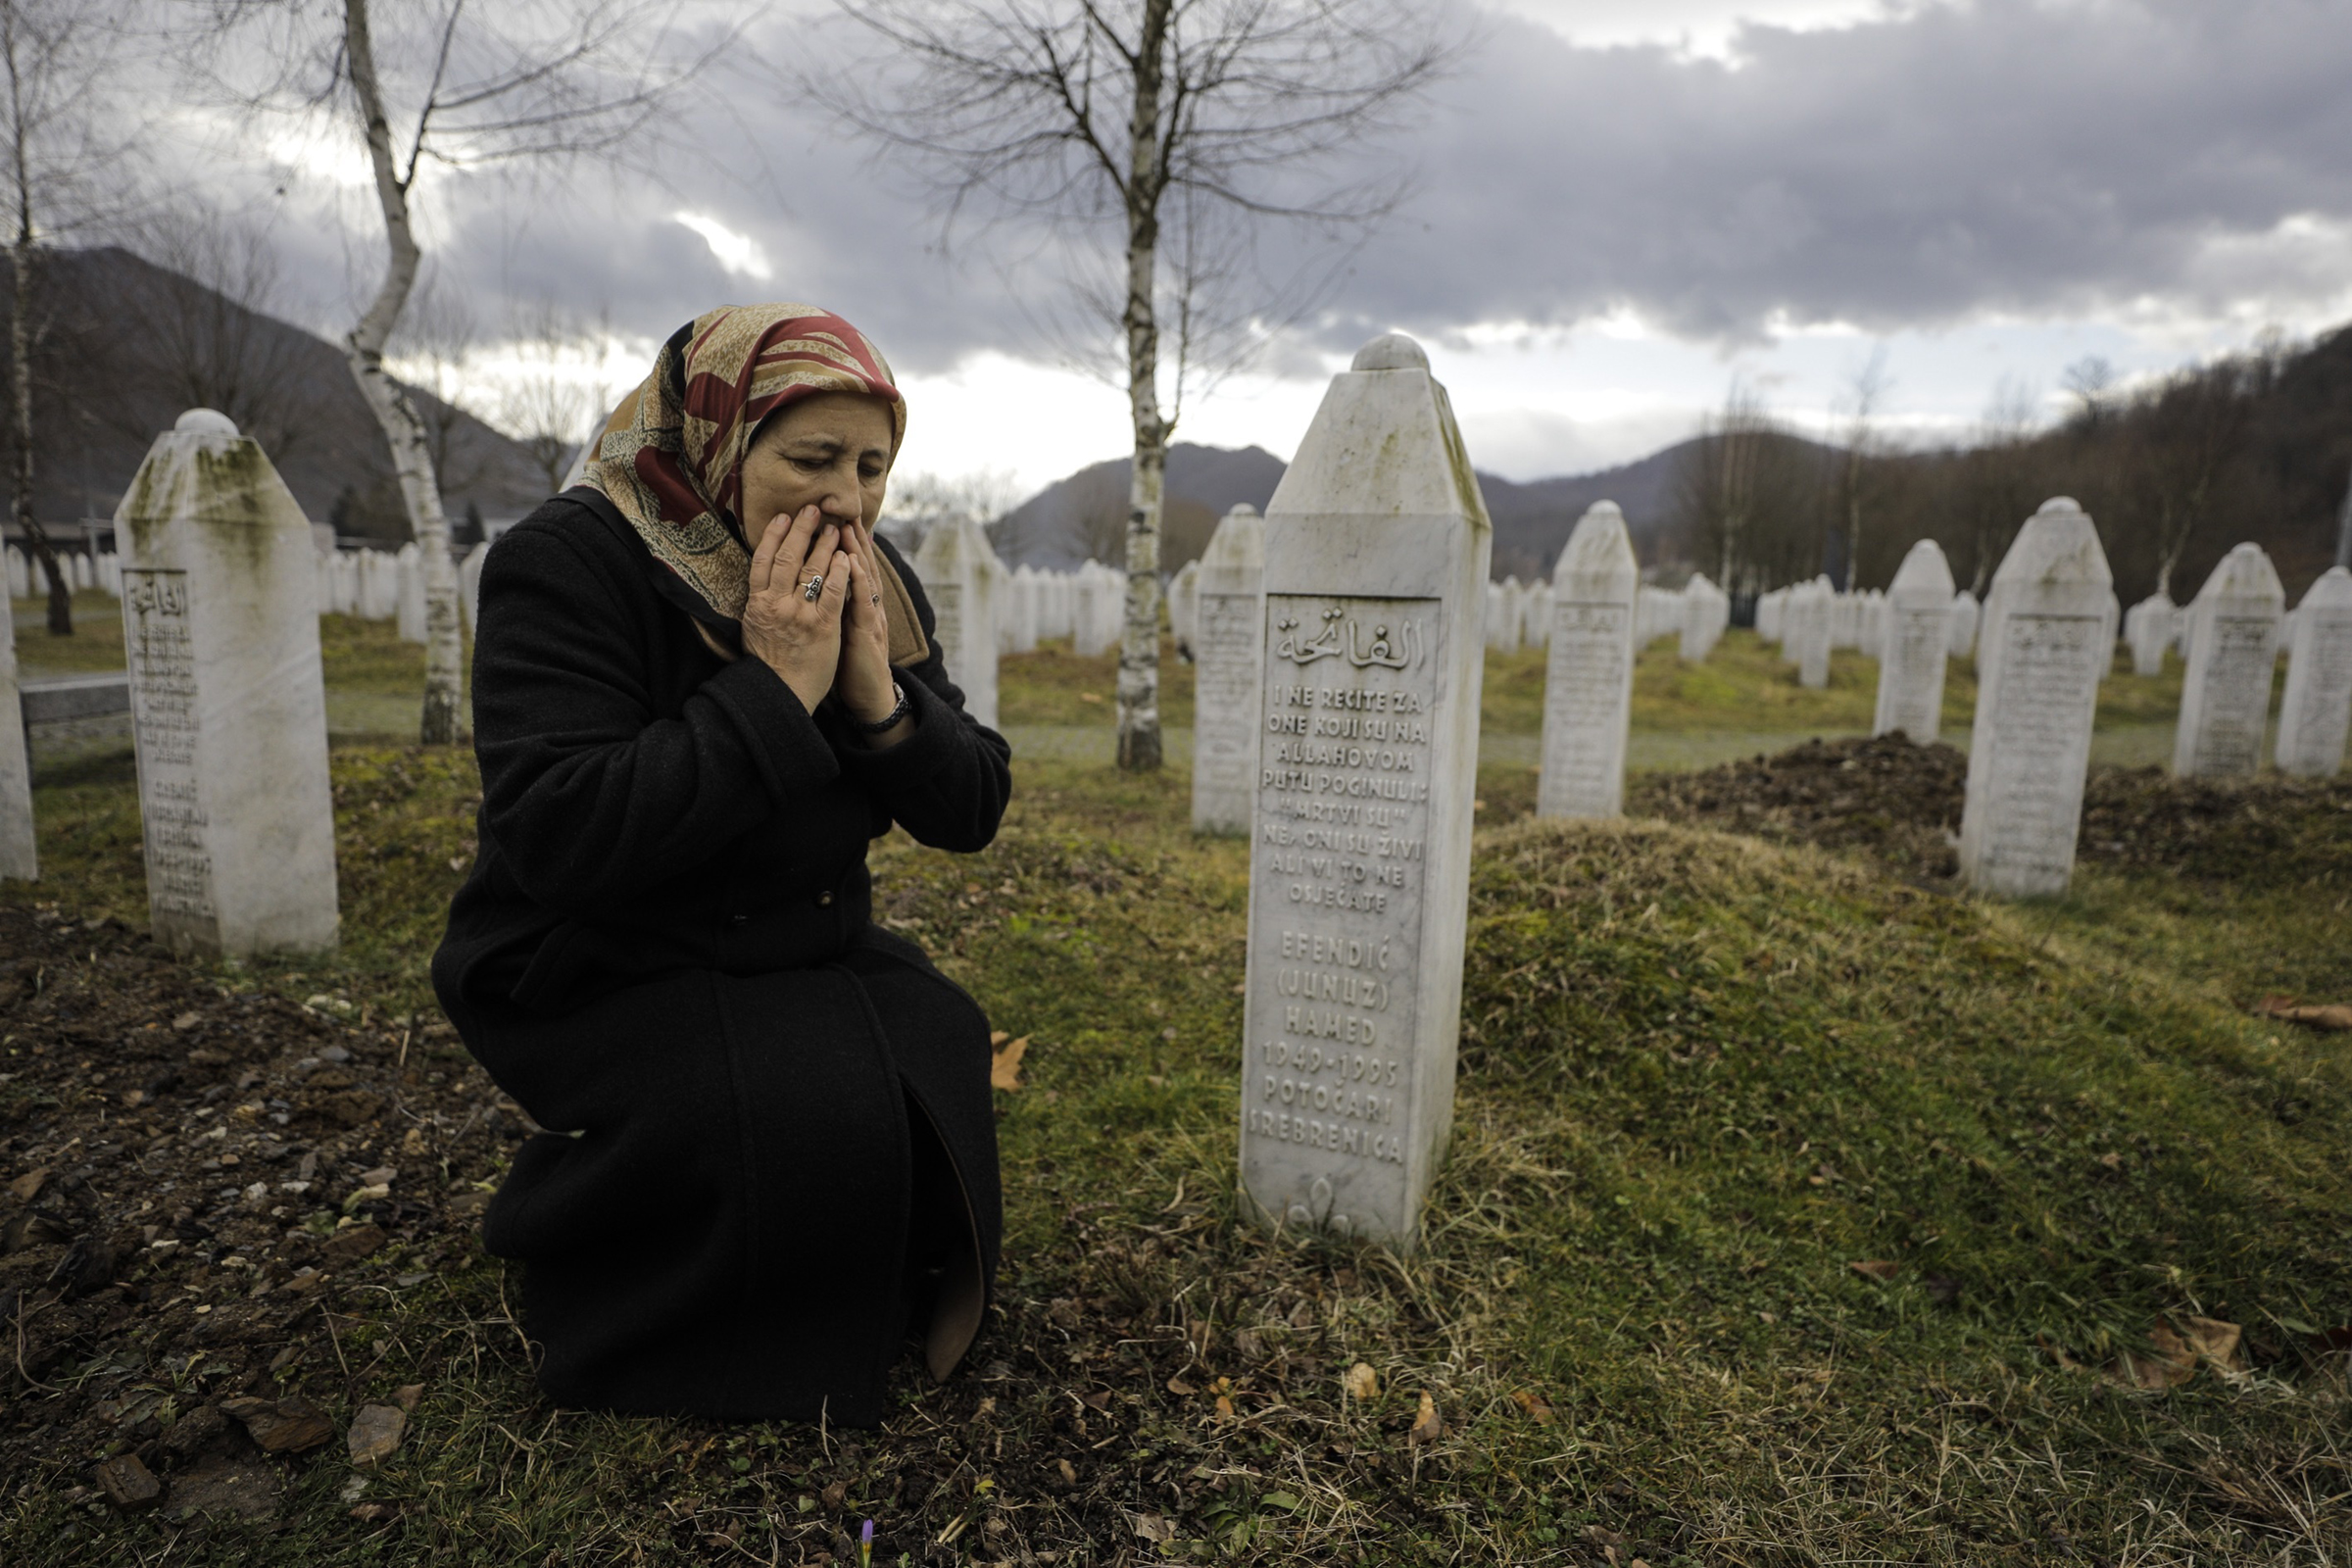 Mother of a Srebrenica victim Fazila Efendic, the mother of a Srebrenica victim visits the graves of her husband and son in Srebrenica, Bosnia, on Feb. 15, 2020. They lost their lives in the Srebrenica genocide, which started on July 11, 1995. (Samir Jordamovic—Anadolu Agency/Getty Images)